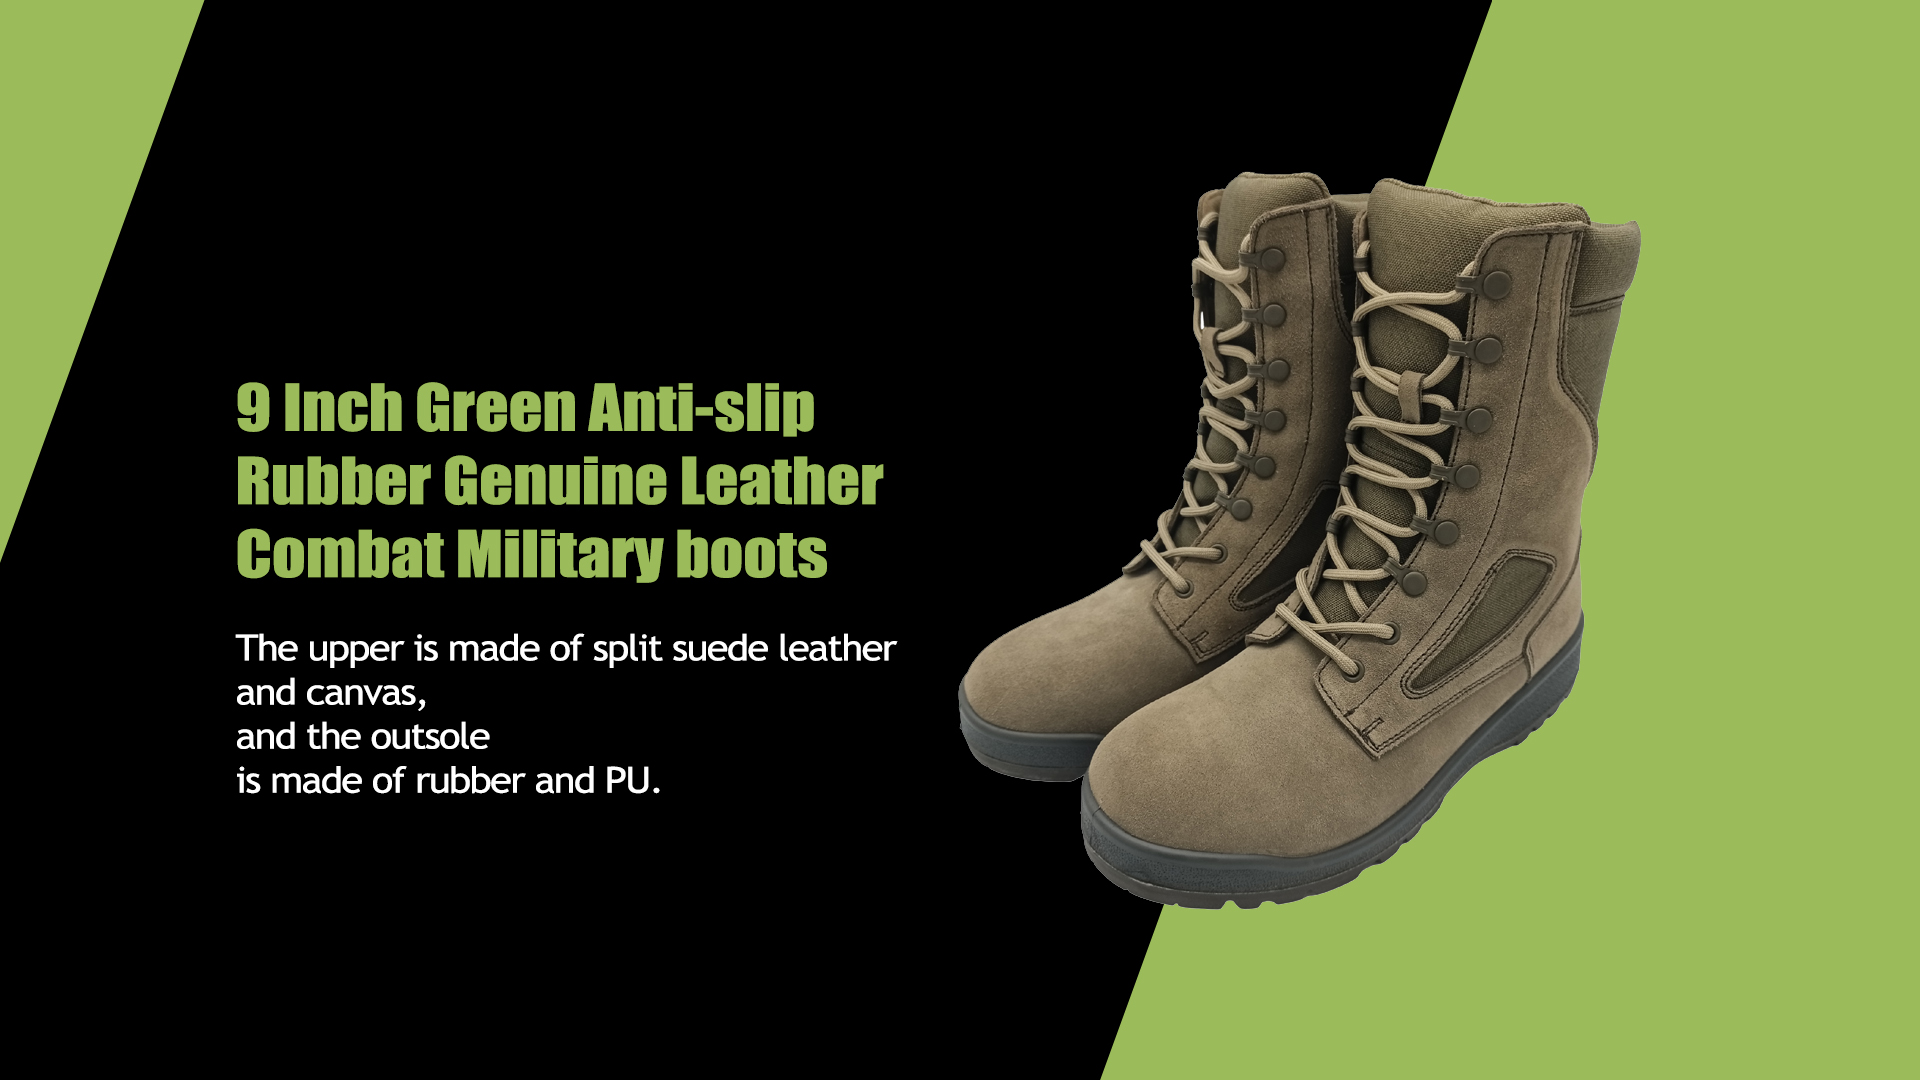 9 Inch Green Anti-slip Rubber Genuine Leather Combat Military boots